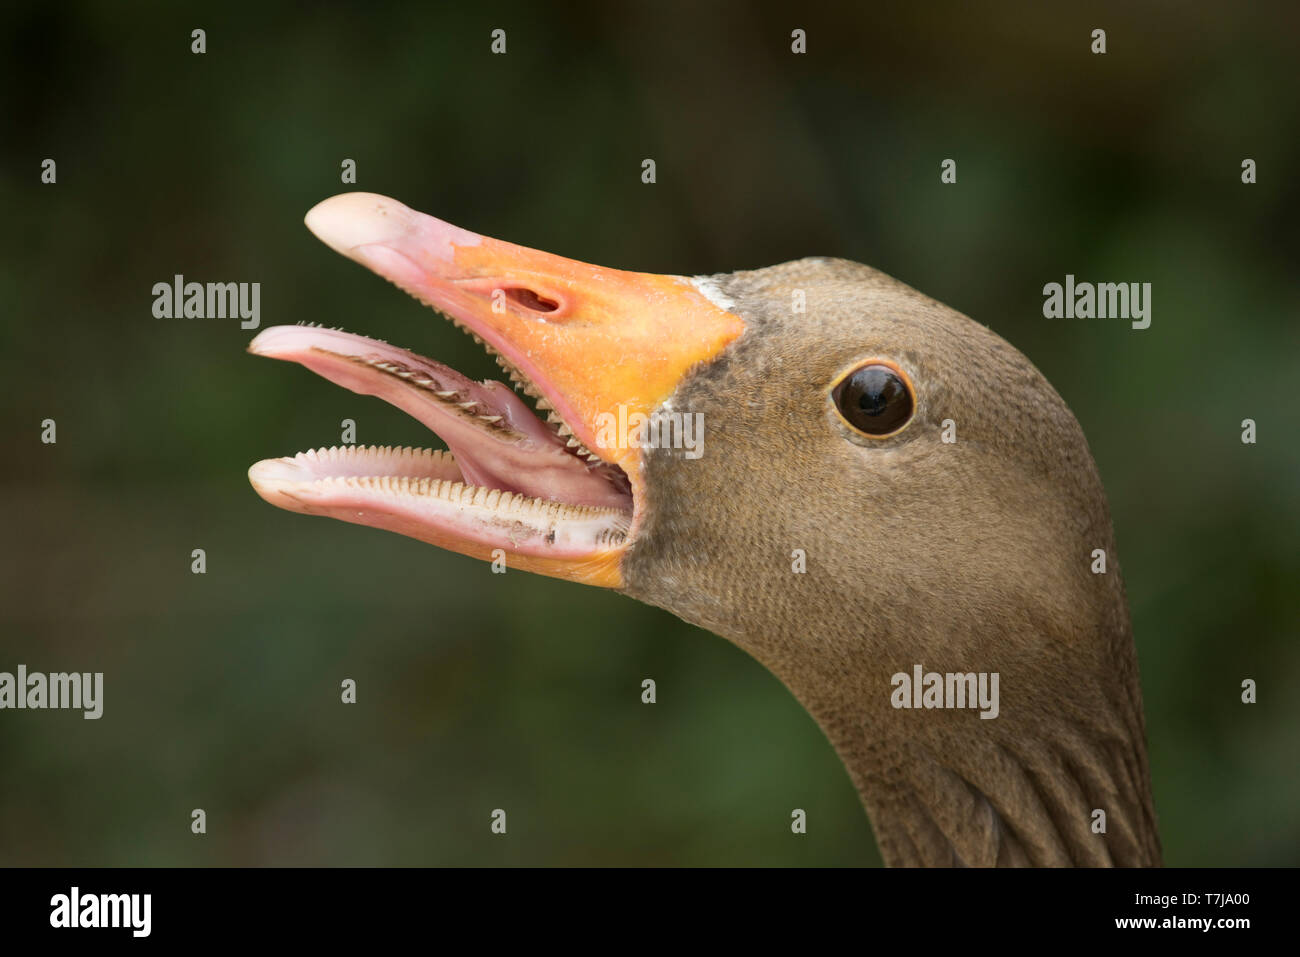 Head of a female greylag goose (Anser anser) with beak open and hissing to protect its goslings, Arundel WWT, July Stock Photo